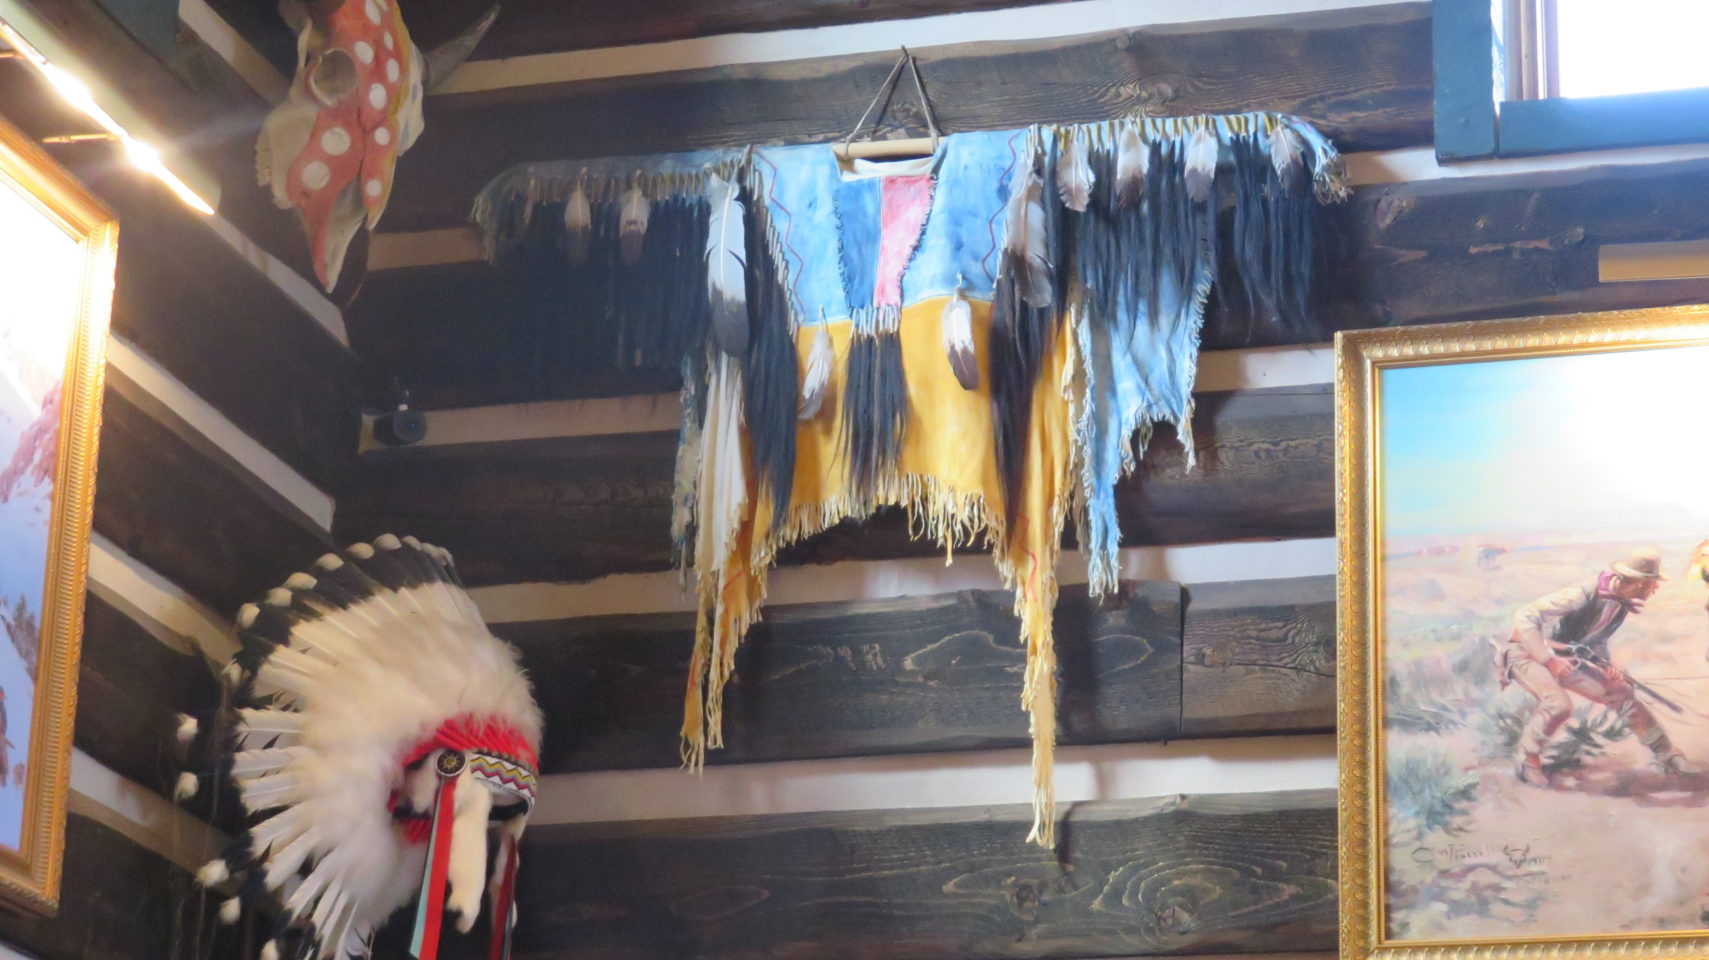 Broadmoor art treasures, including Native American Garb worn by Kostner in his blockbuster film, Dances with Wolves. A gift from Kevin Kostner.